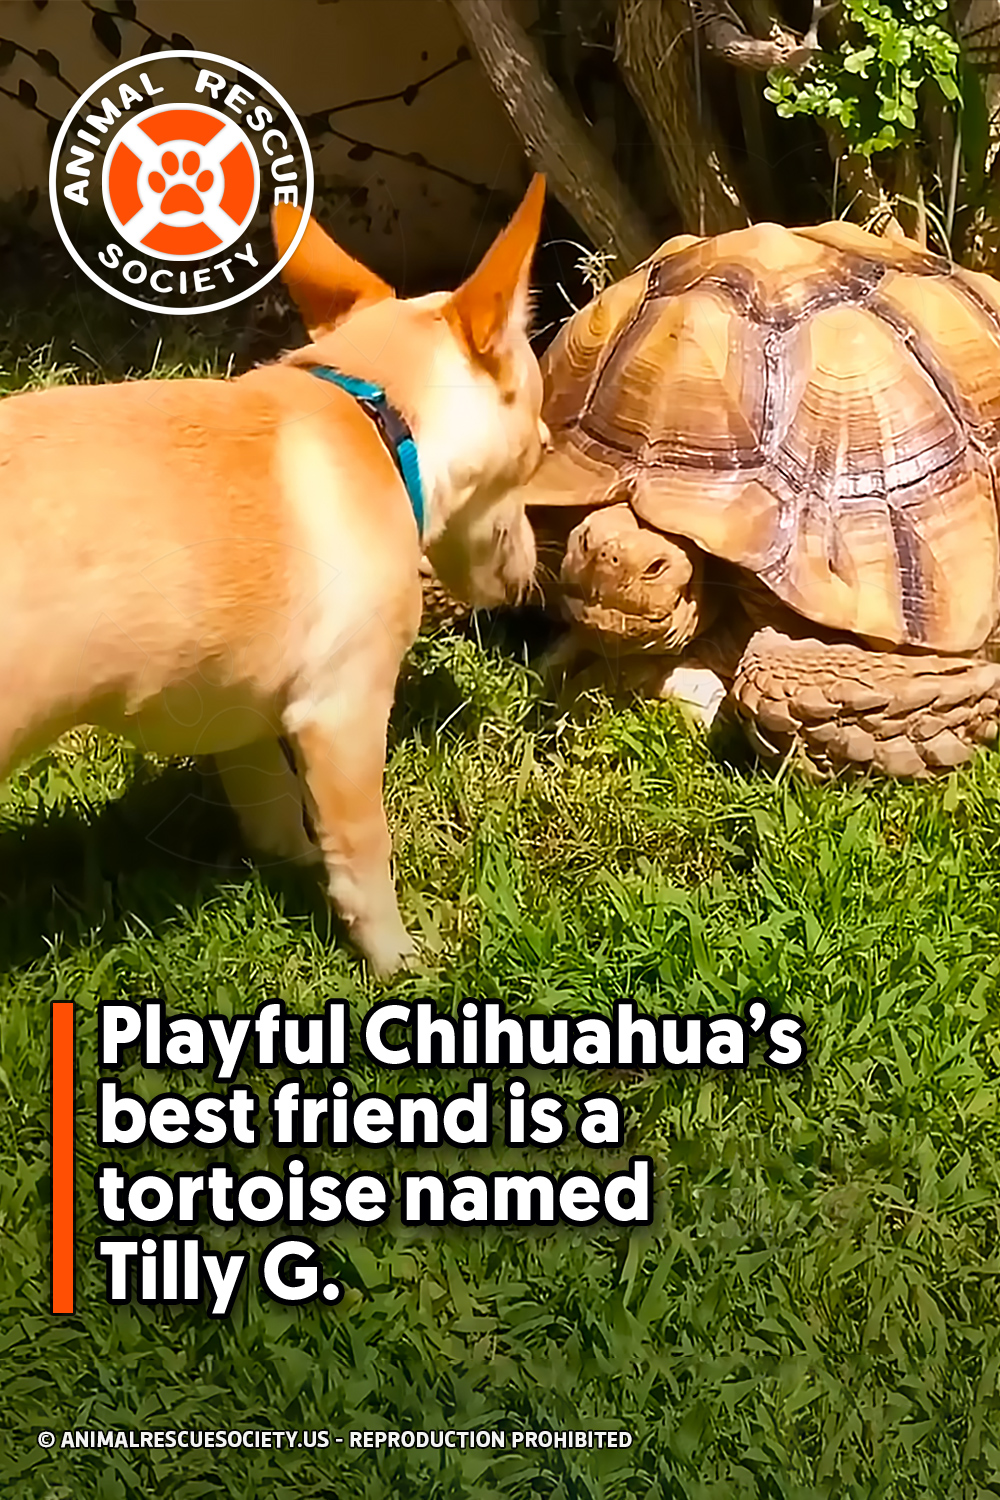 Playful Chihuahua’s best friend is a tortoise named Tilly G.